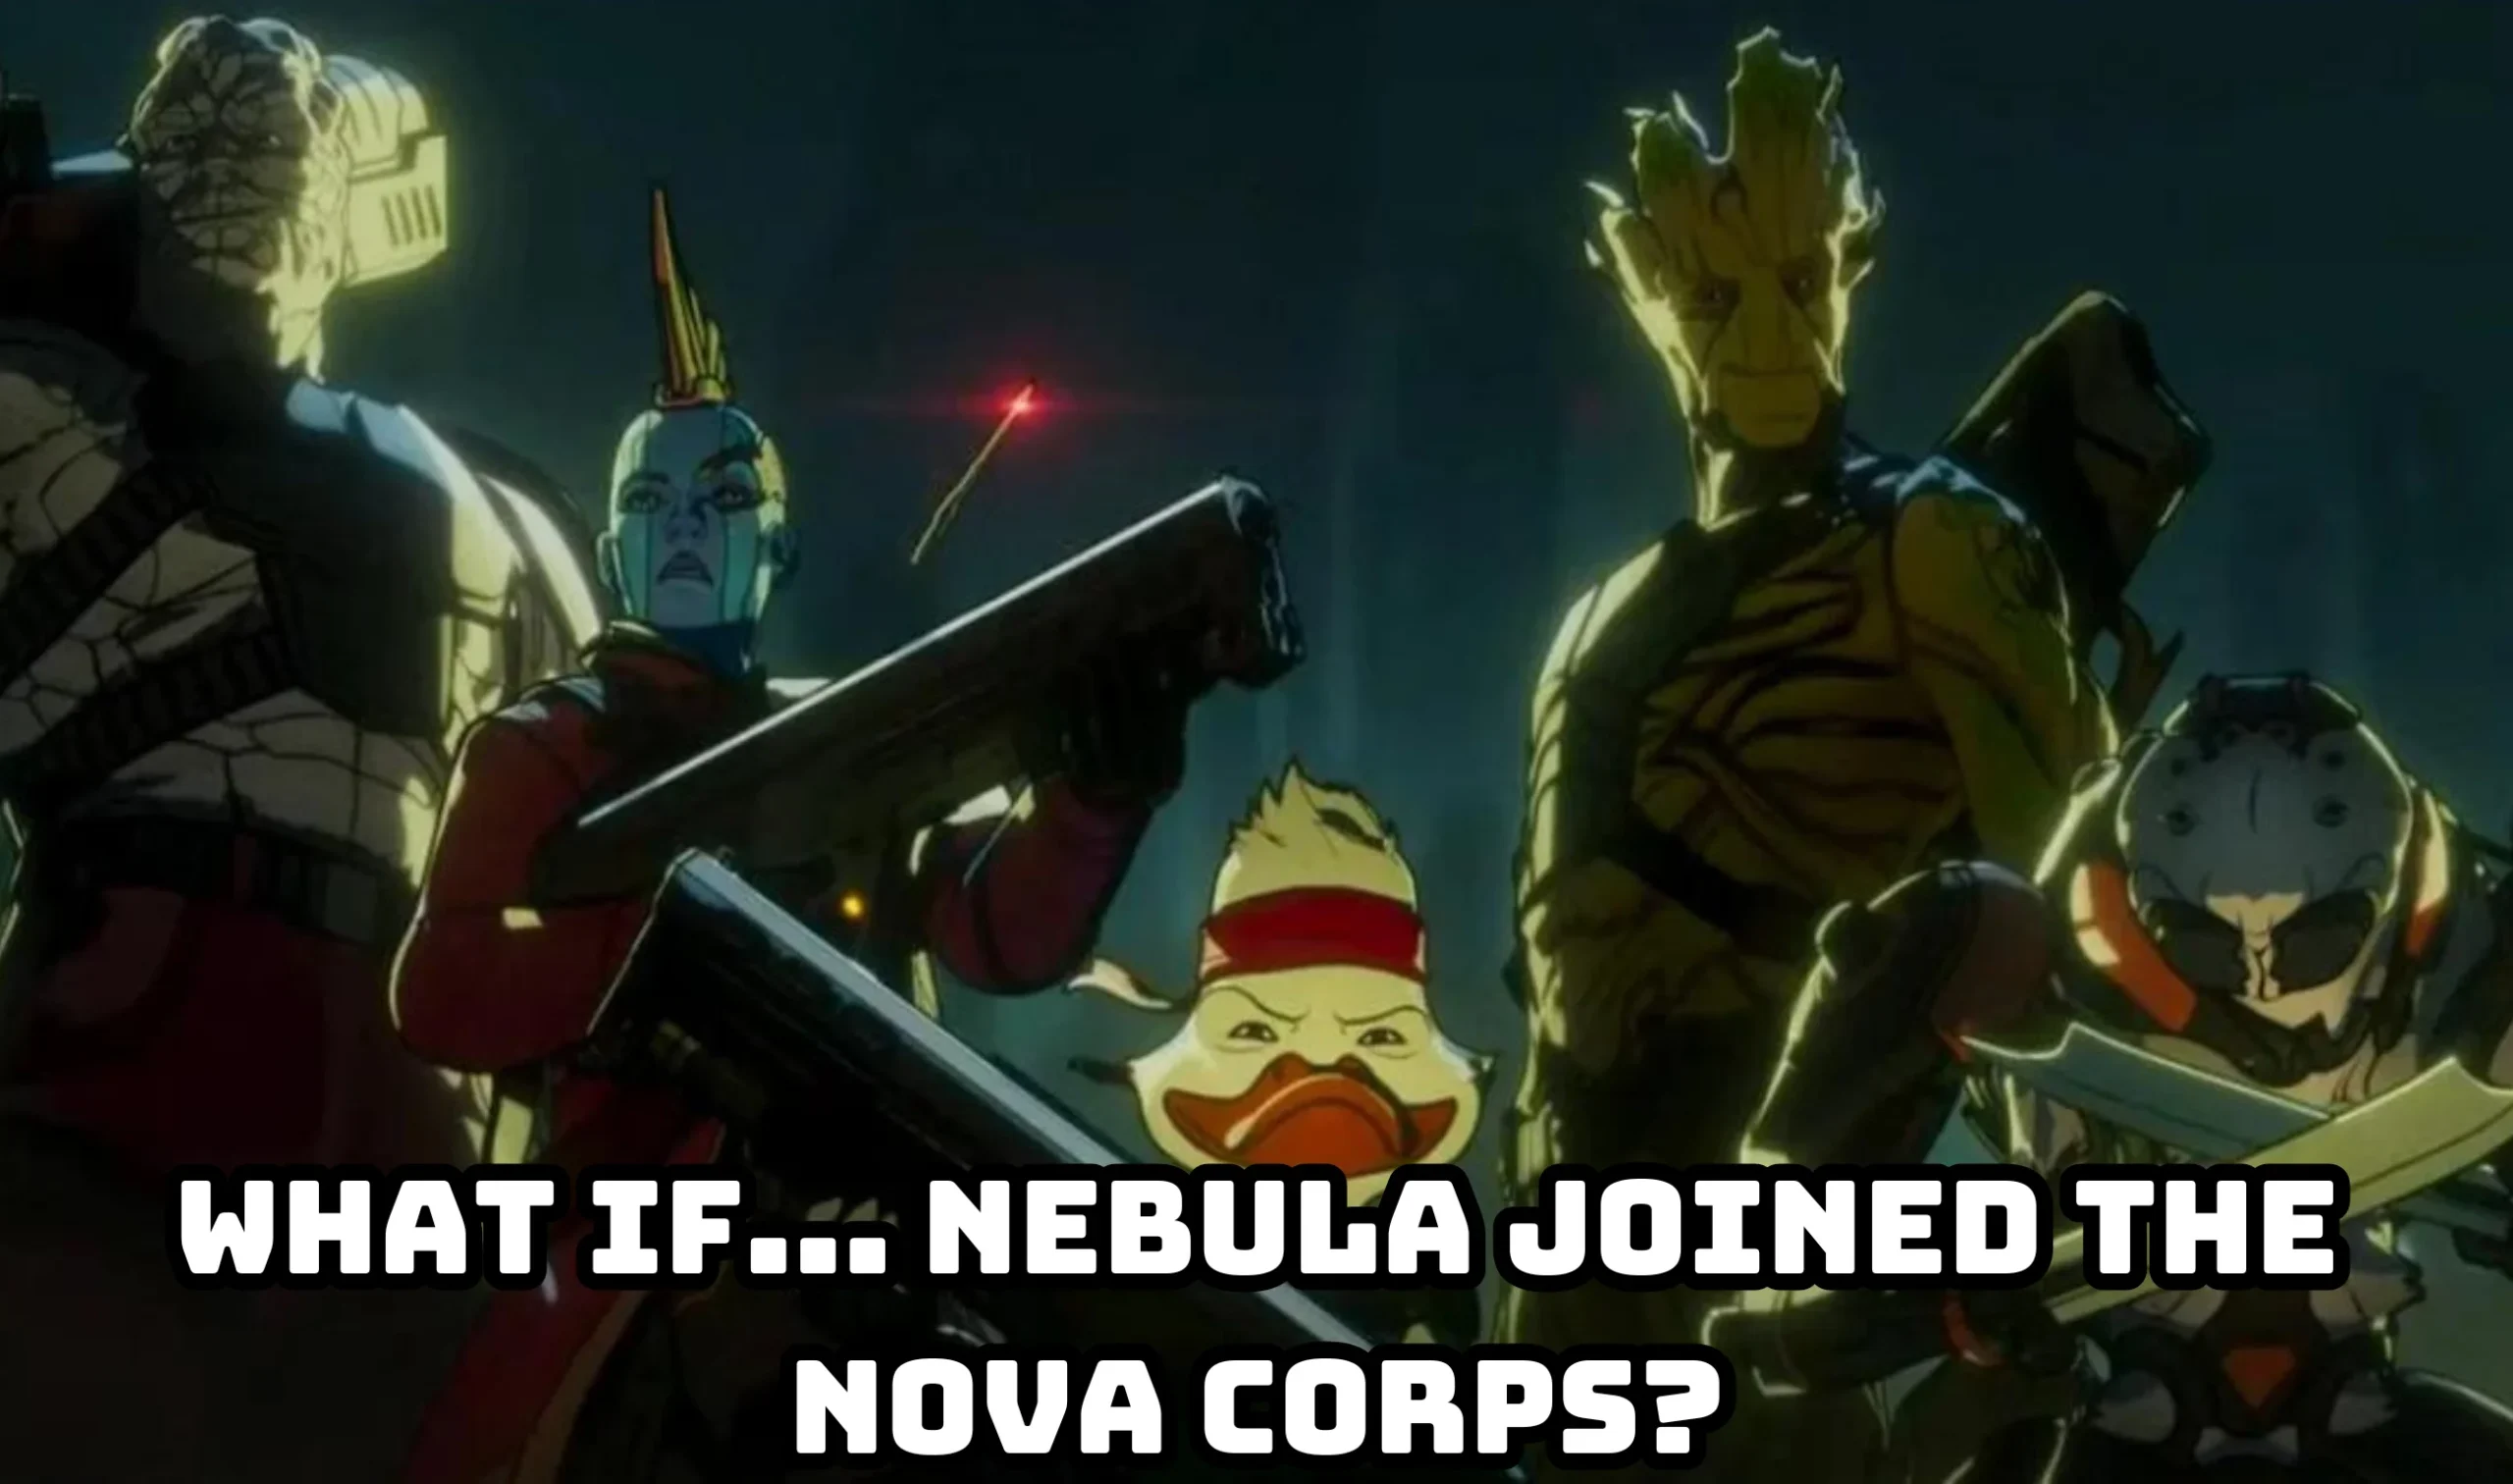 What If Season 2 Episode 1 Review: What If… Nebula Joined the Nova Corps?